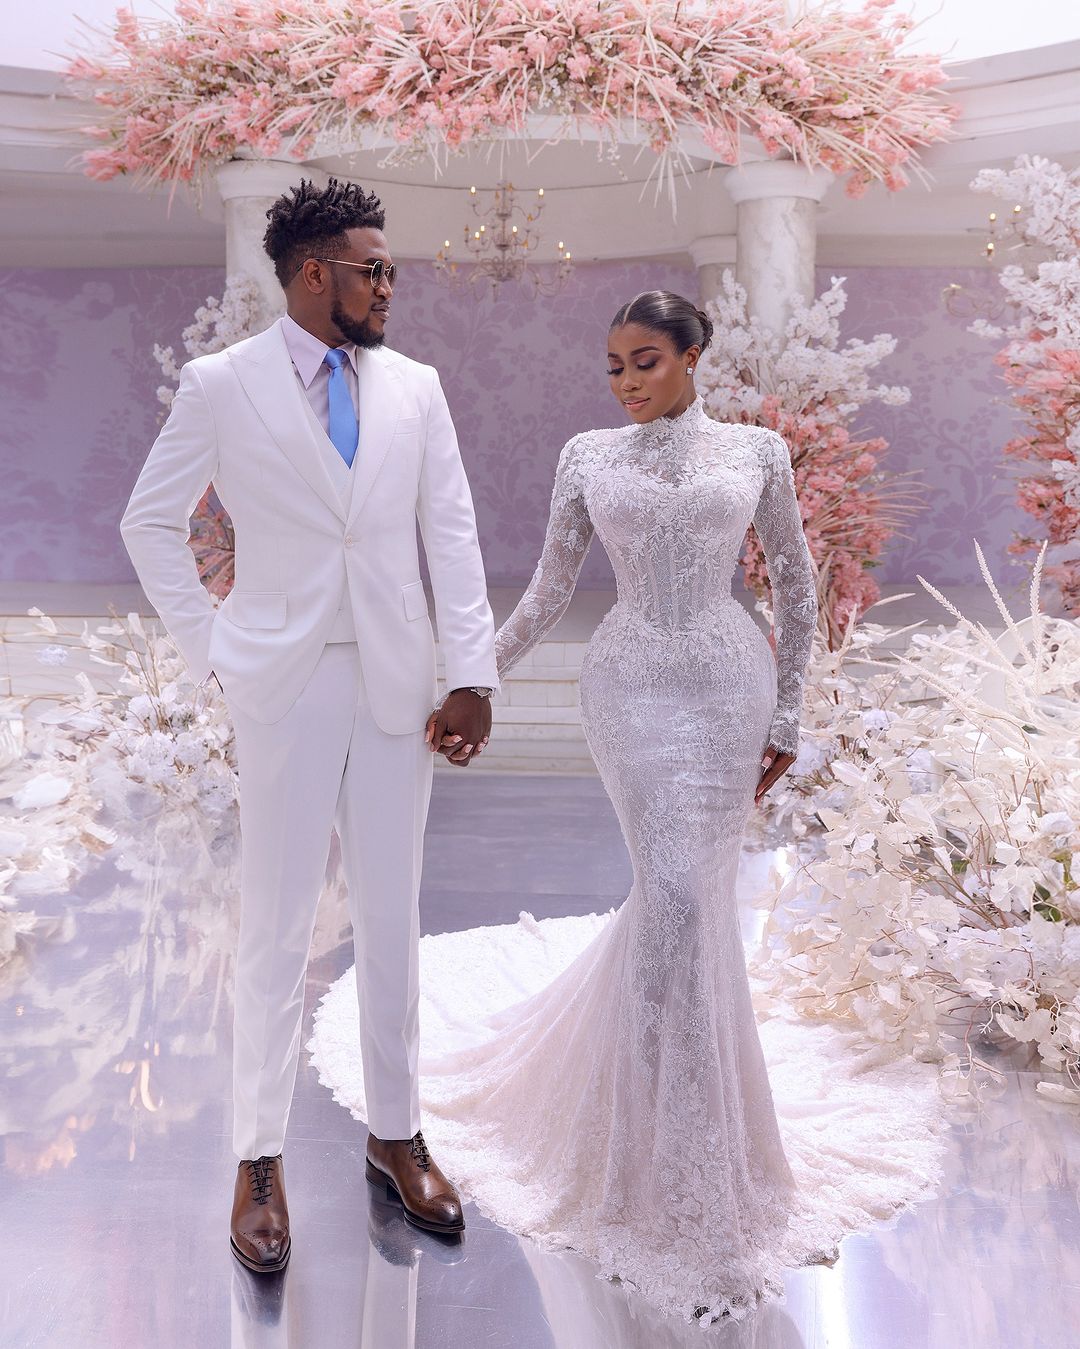 Fill Your Day With All The Sweetness From Veekee James and Femi’s White Marriage ceremony Highlights!